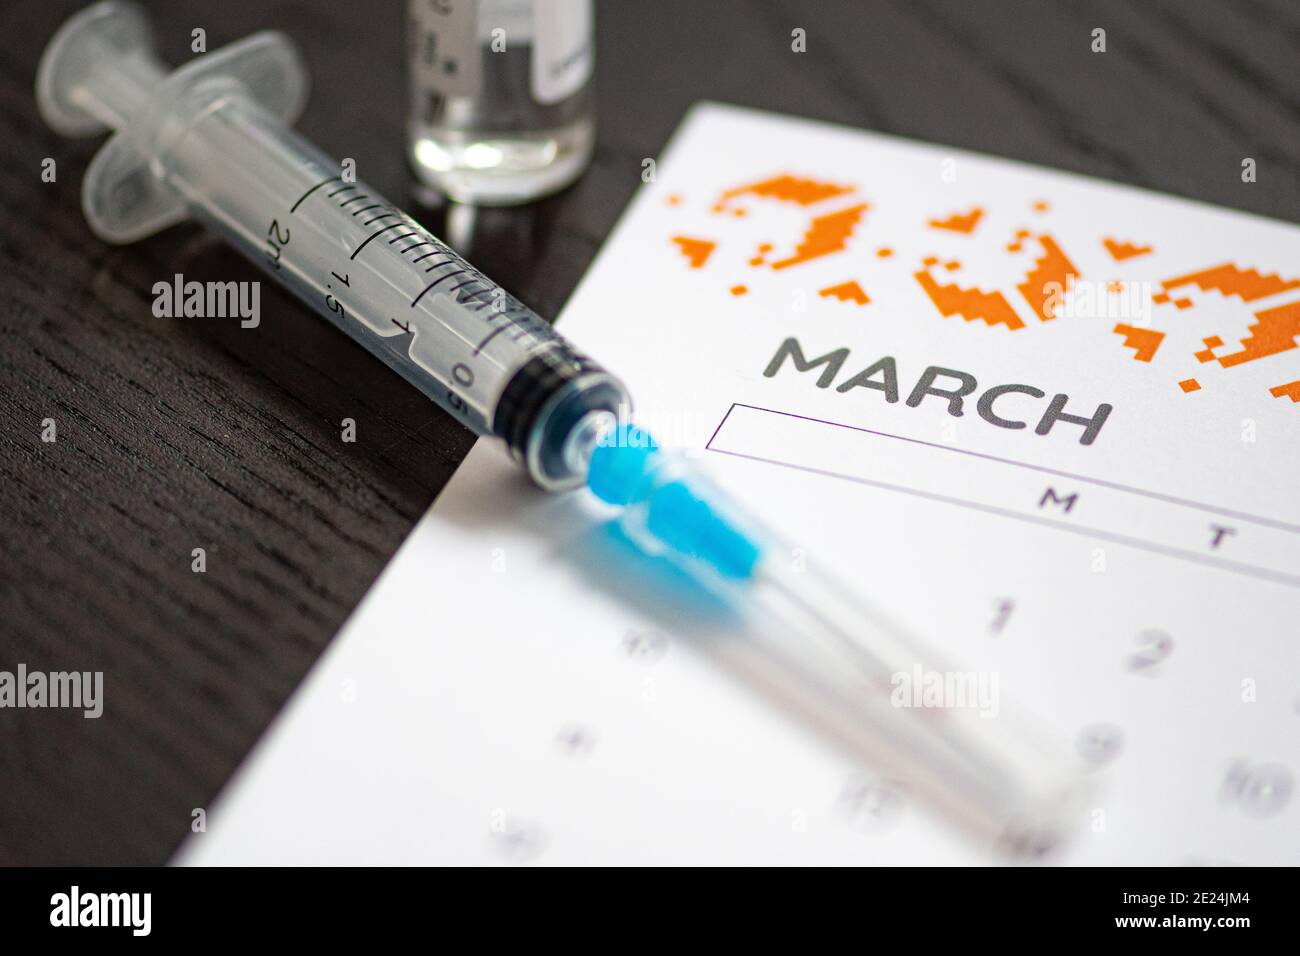 Syringe, vial and calendar with month of March on a black table ready to be used. Covid or Coronavirus vaccine background Stock Photo